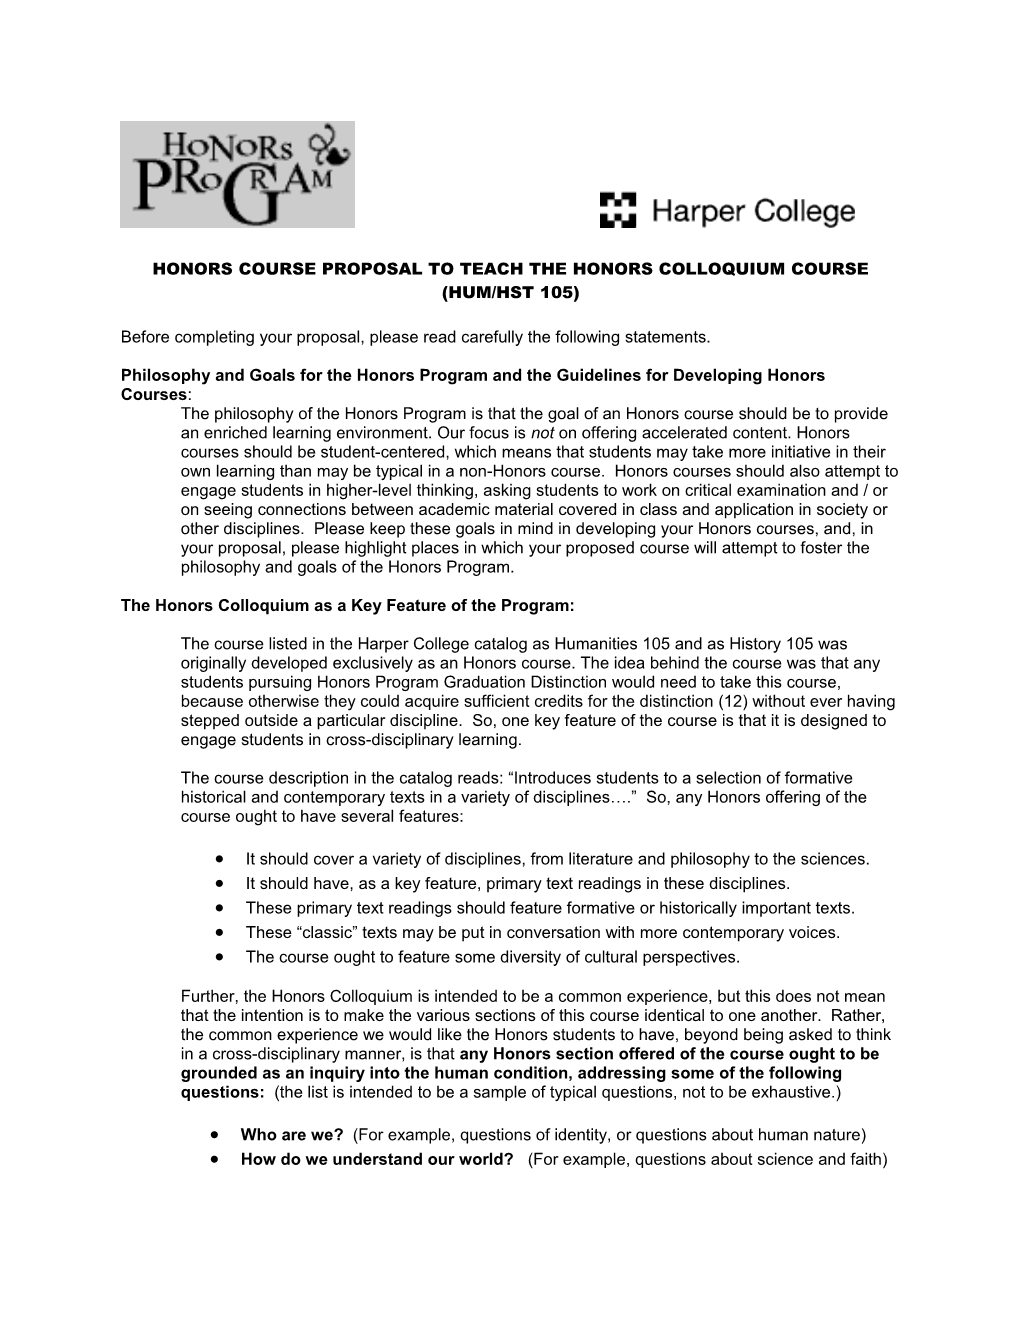 Honors Course Proposal to Teach the Honors Colloquium Course (Hum/Hst 105)